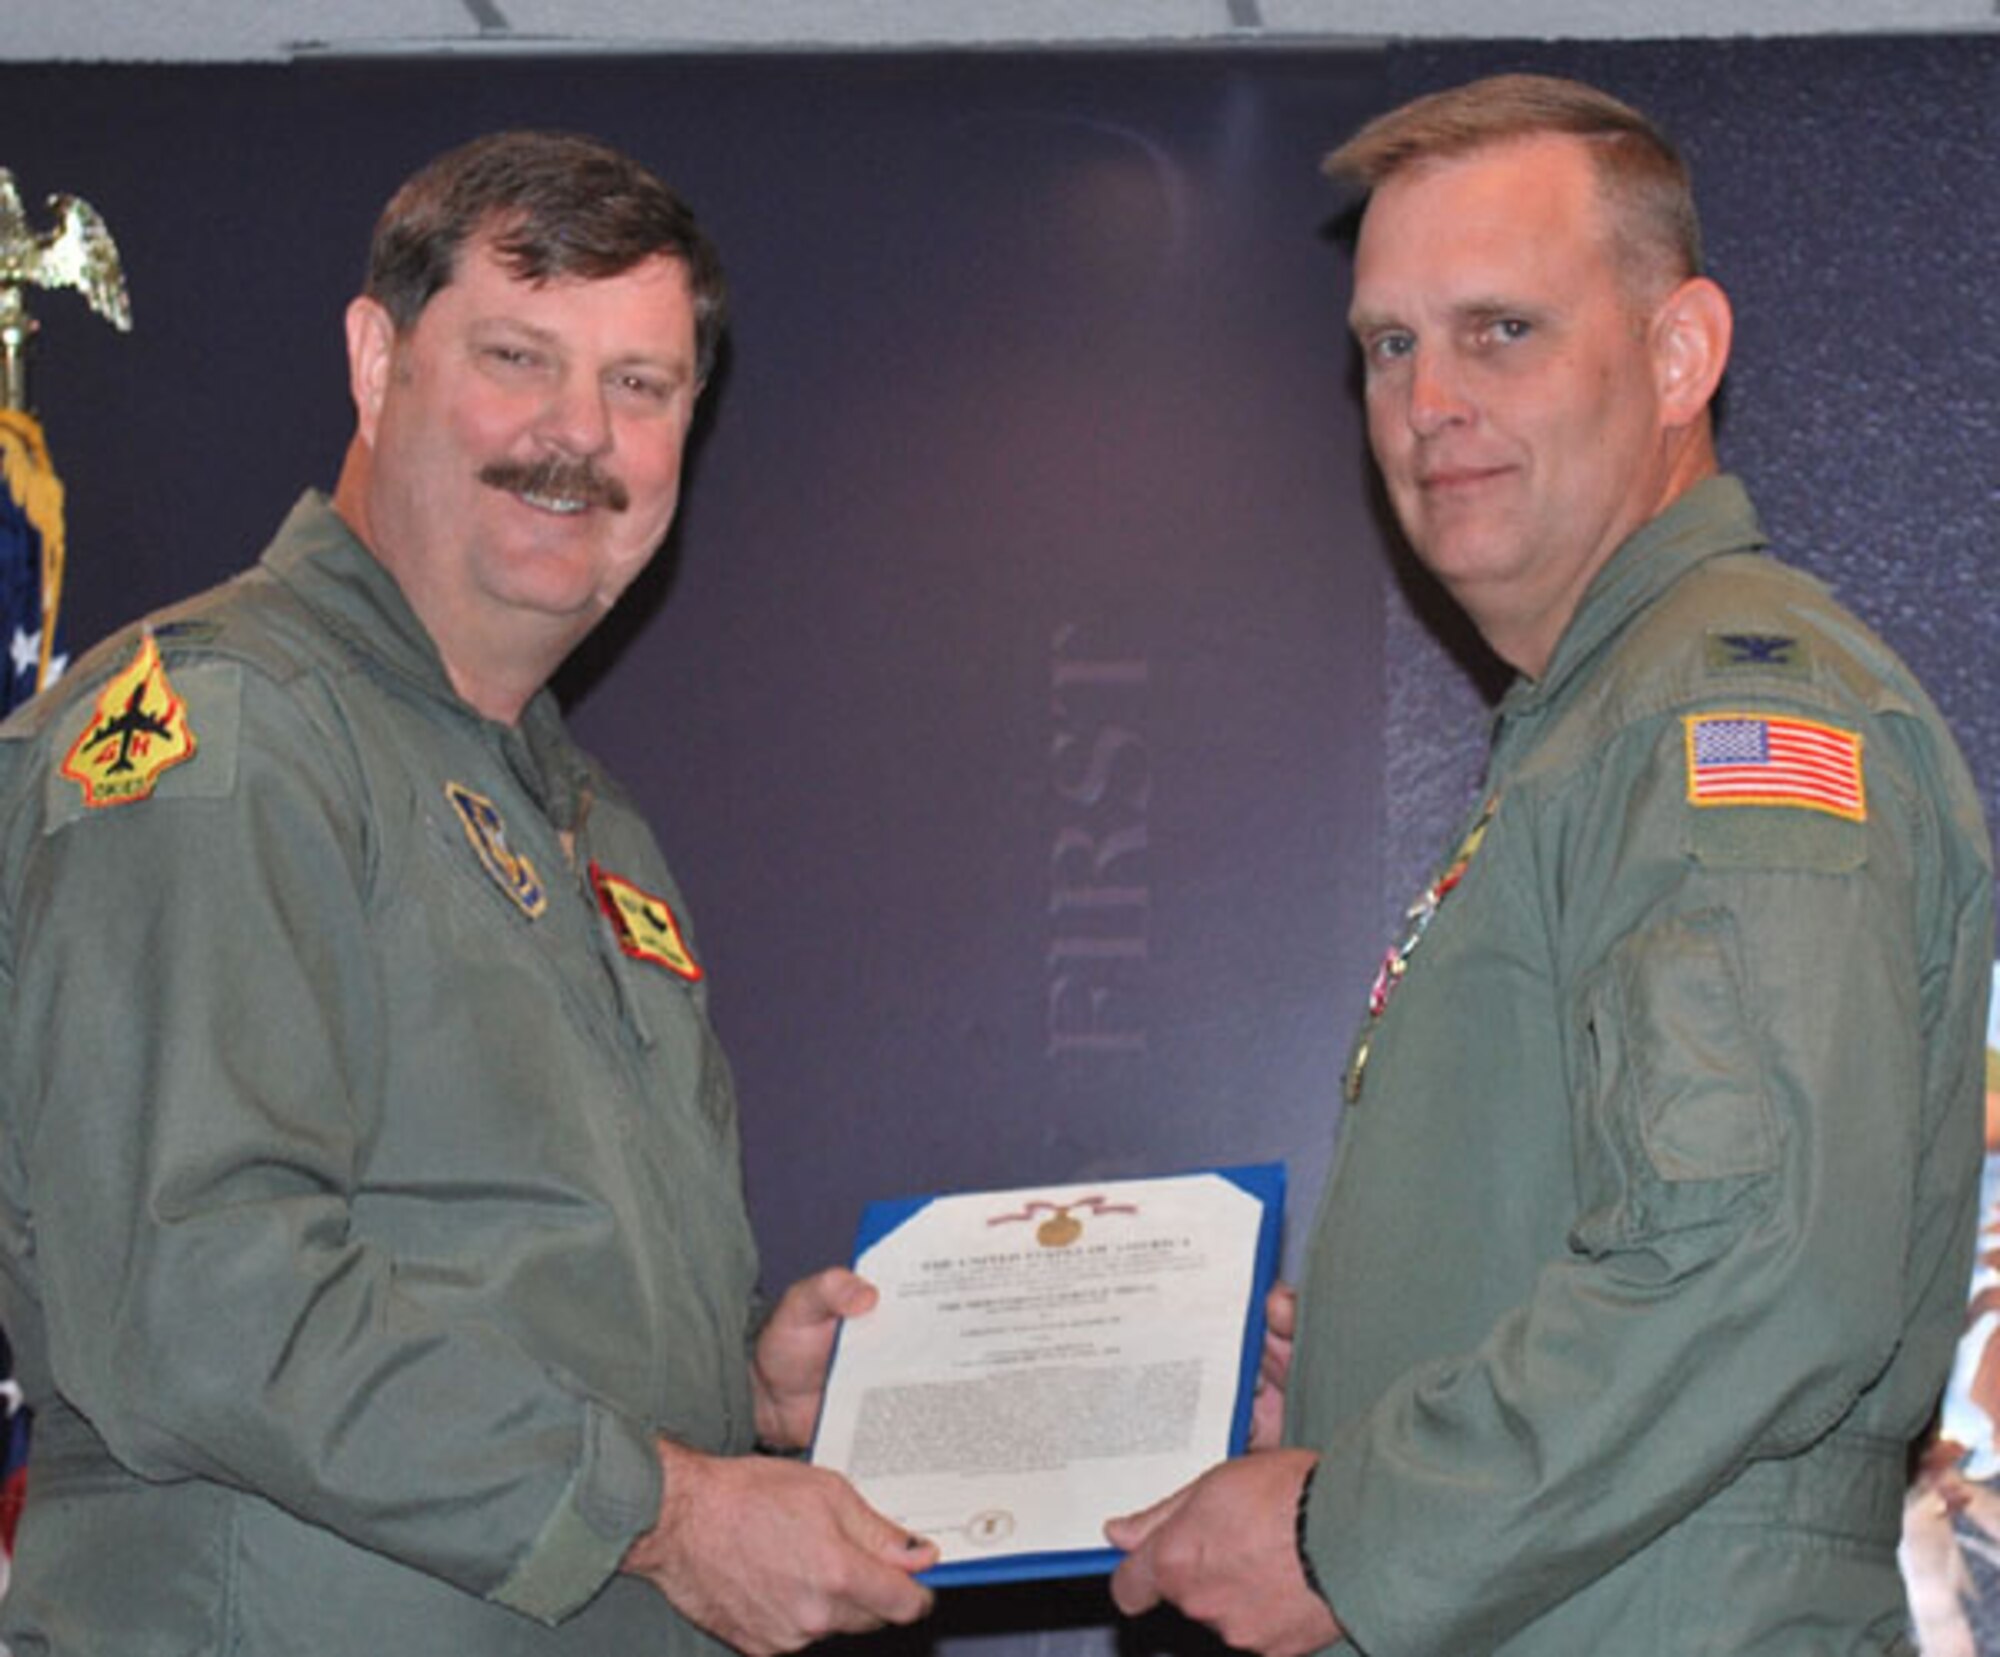 Col. William Mason, pictured with Col. Gregory Gilmour, is presented a
Meritorious Service Medal on April 10, 2010. He relinquished command of the 465th Air Refueling Squadron on April 10, in preparation for his new
assignment as commander of the 434th Operations Group, Grissom Air Reserve Base, Indiana. Mason is a Command Pilot with more than 5,300 hours. He has flown the
T-34C, T-2C, TA-4J, T-44A, E-6A,